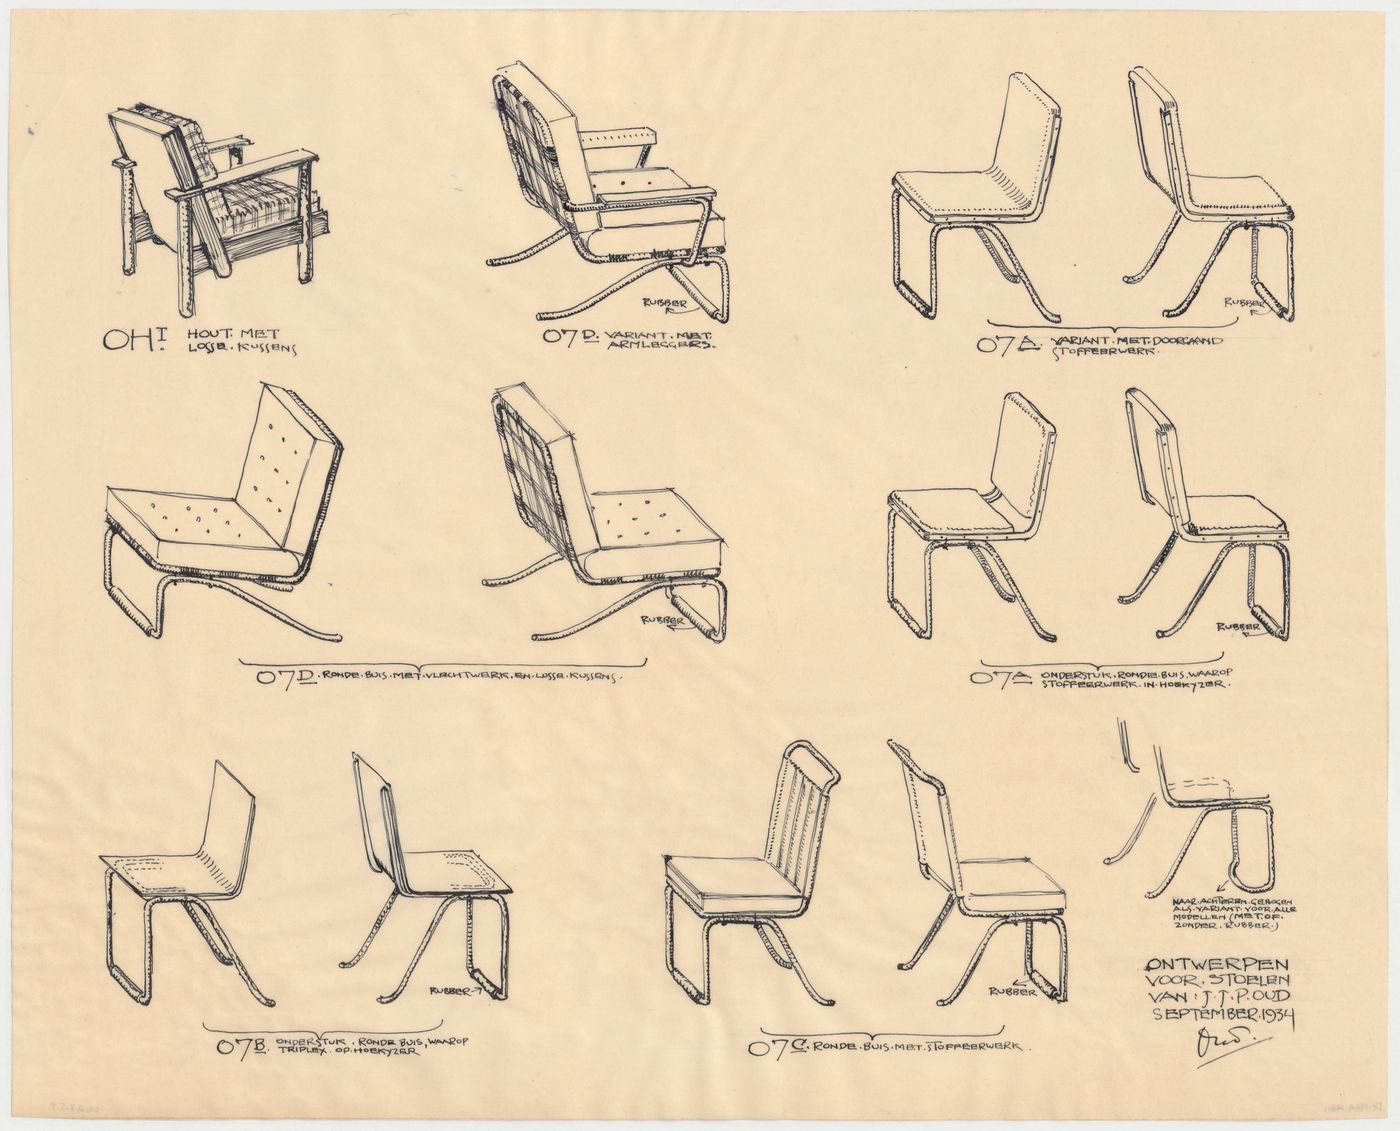 Perspectives for chair designs for Metz & Co., Amsterdam, Netherlands